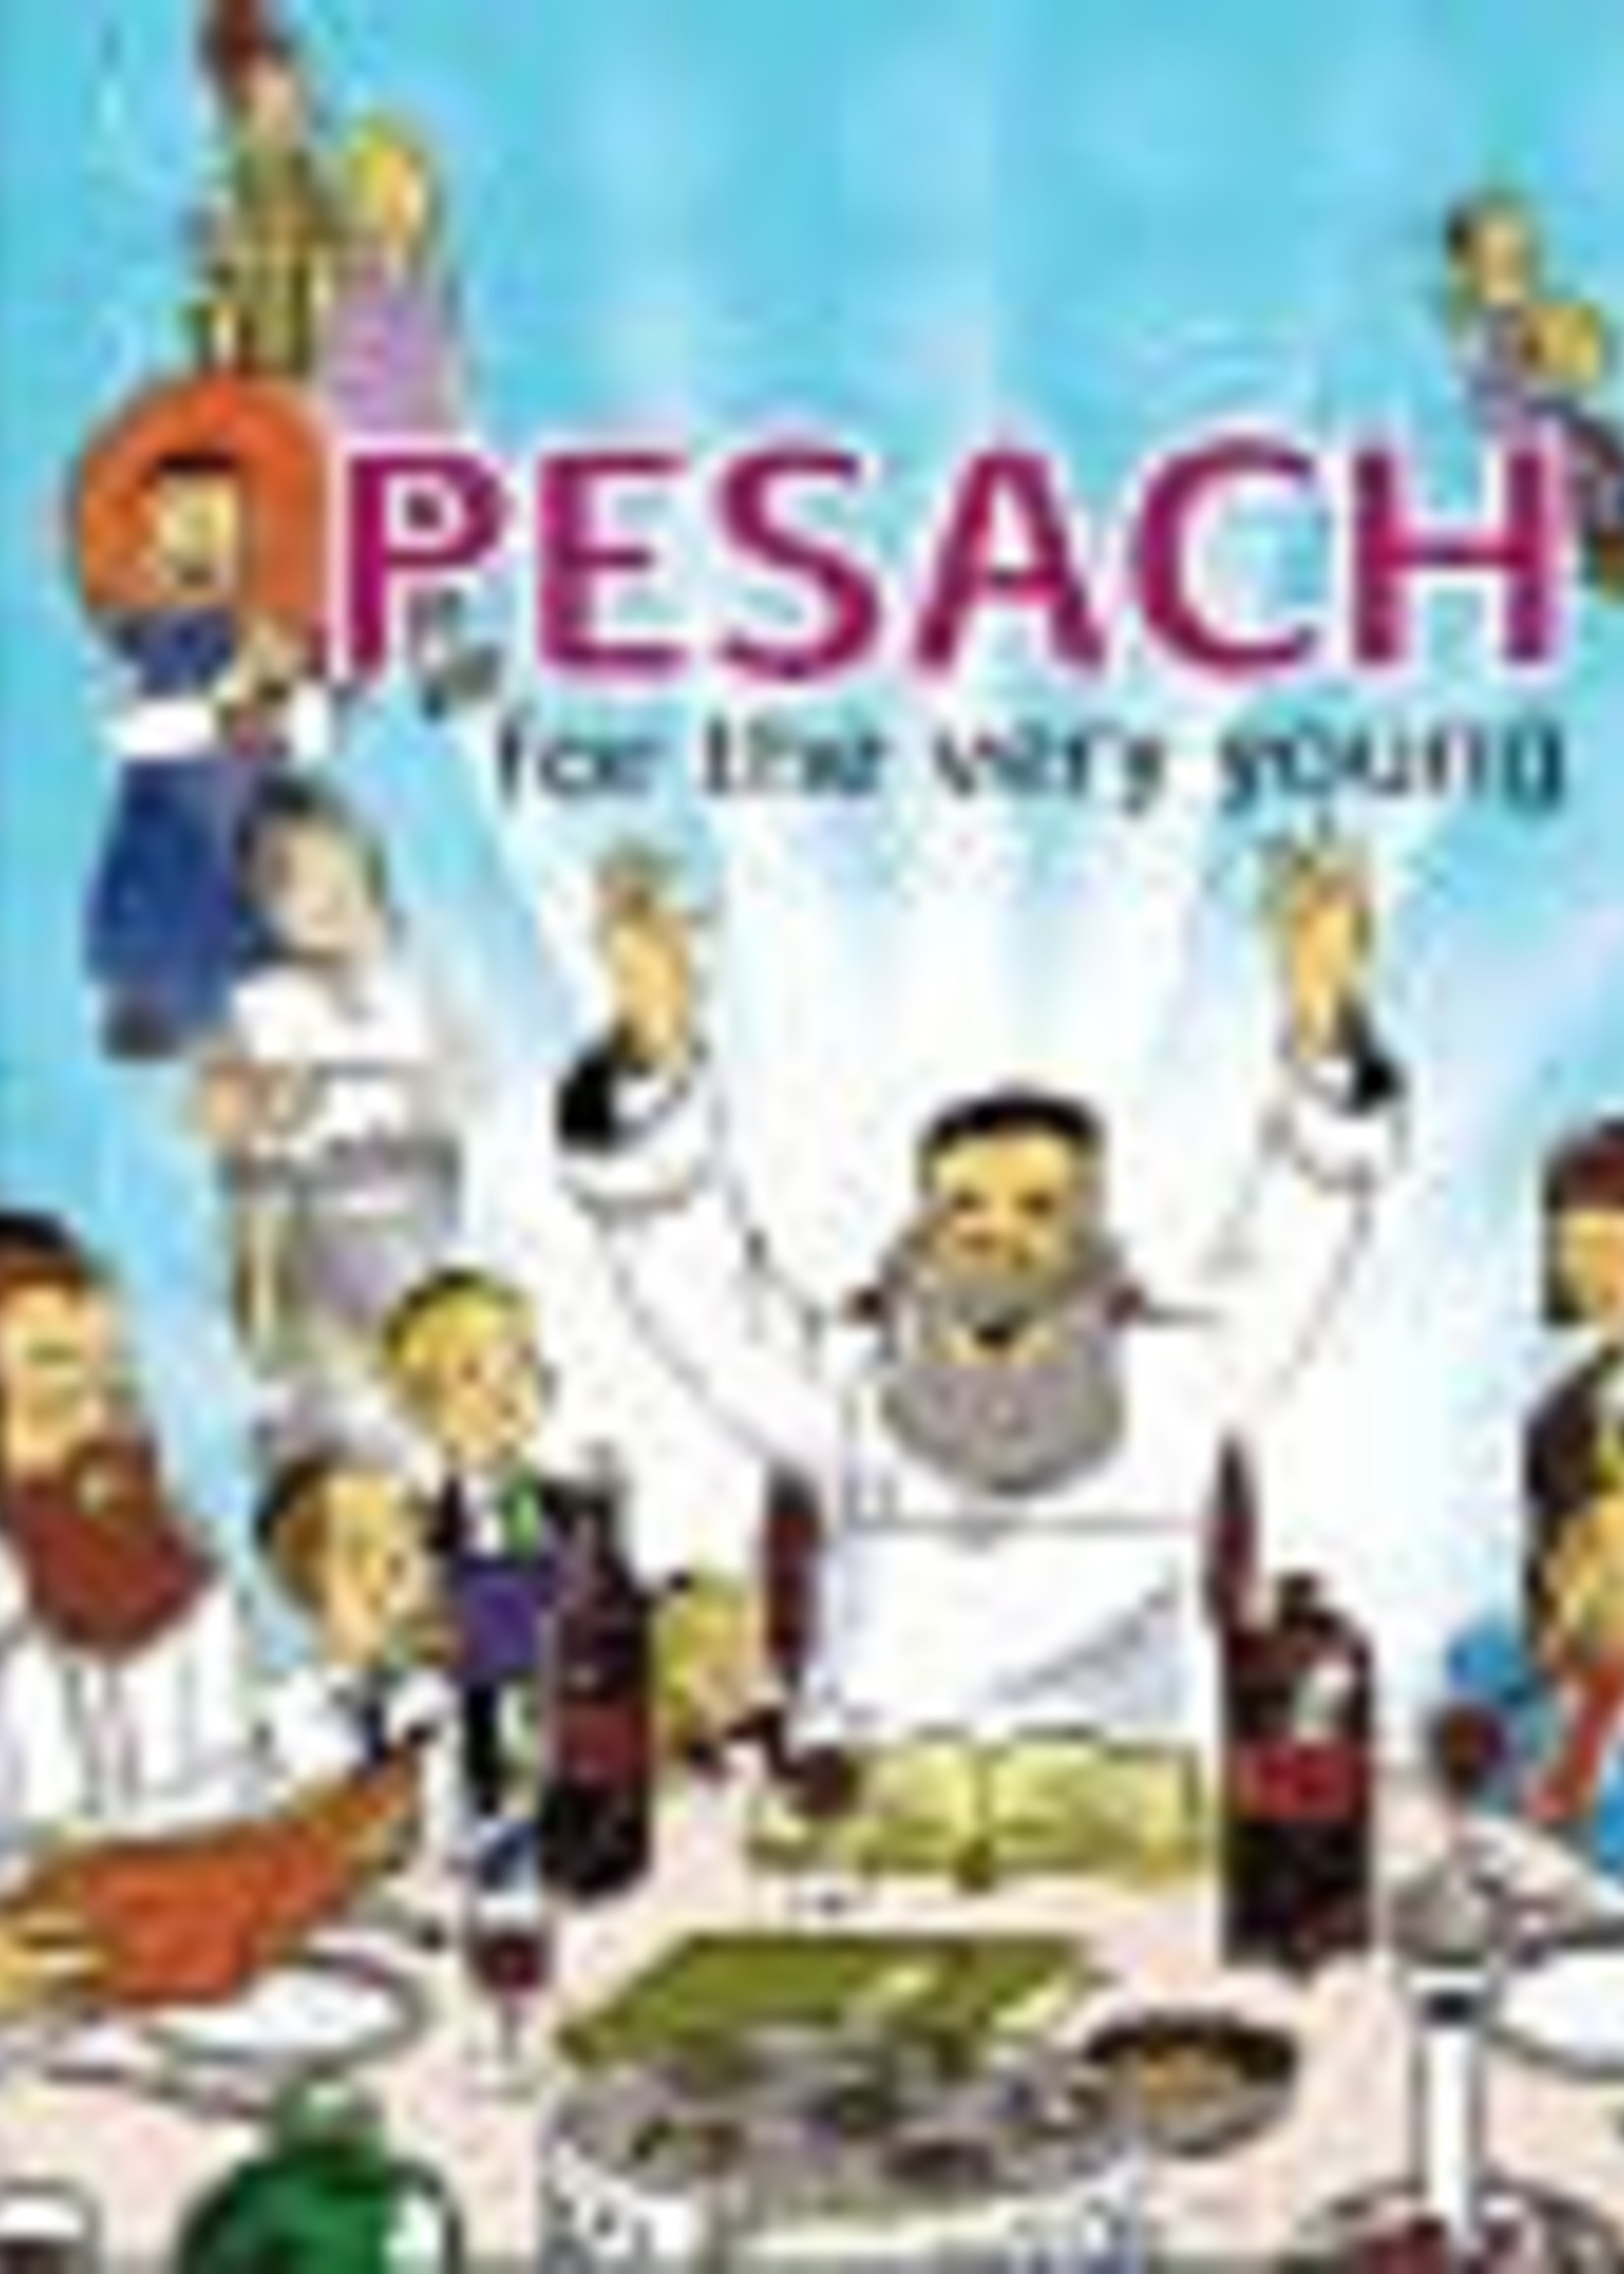 Rabbi Yaakov Hopkowitz PESACH FOR THE VERY YOUNG